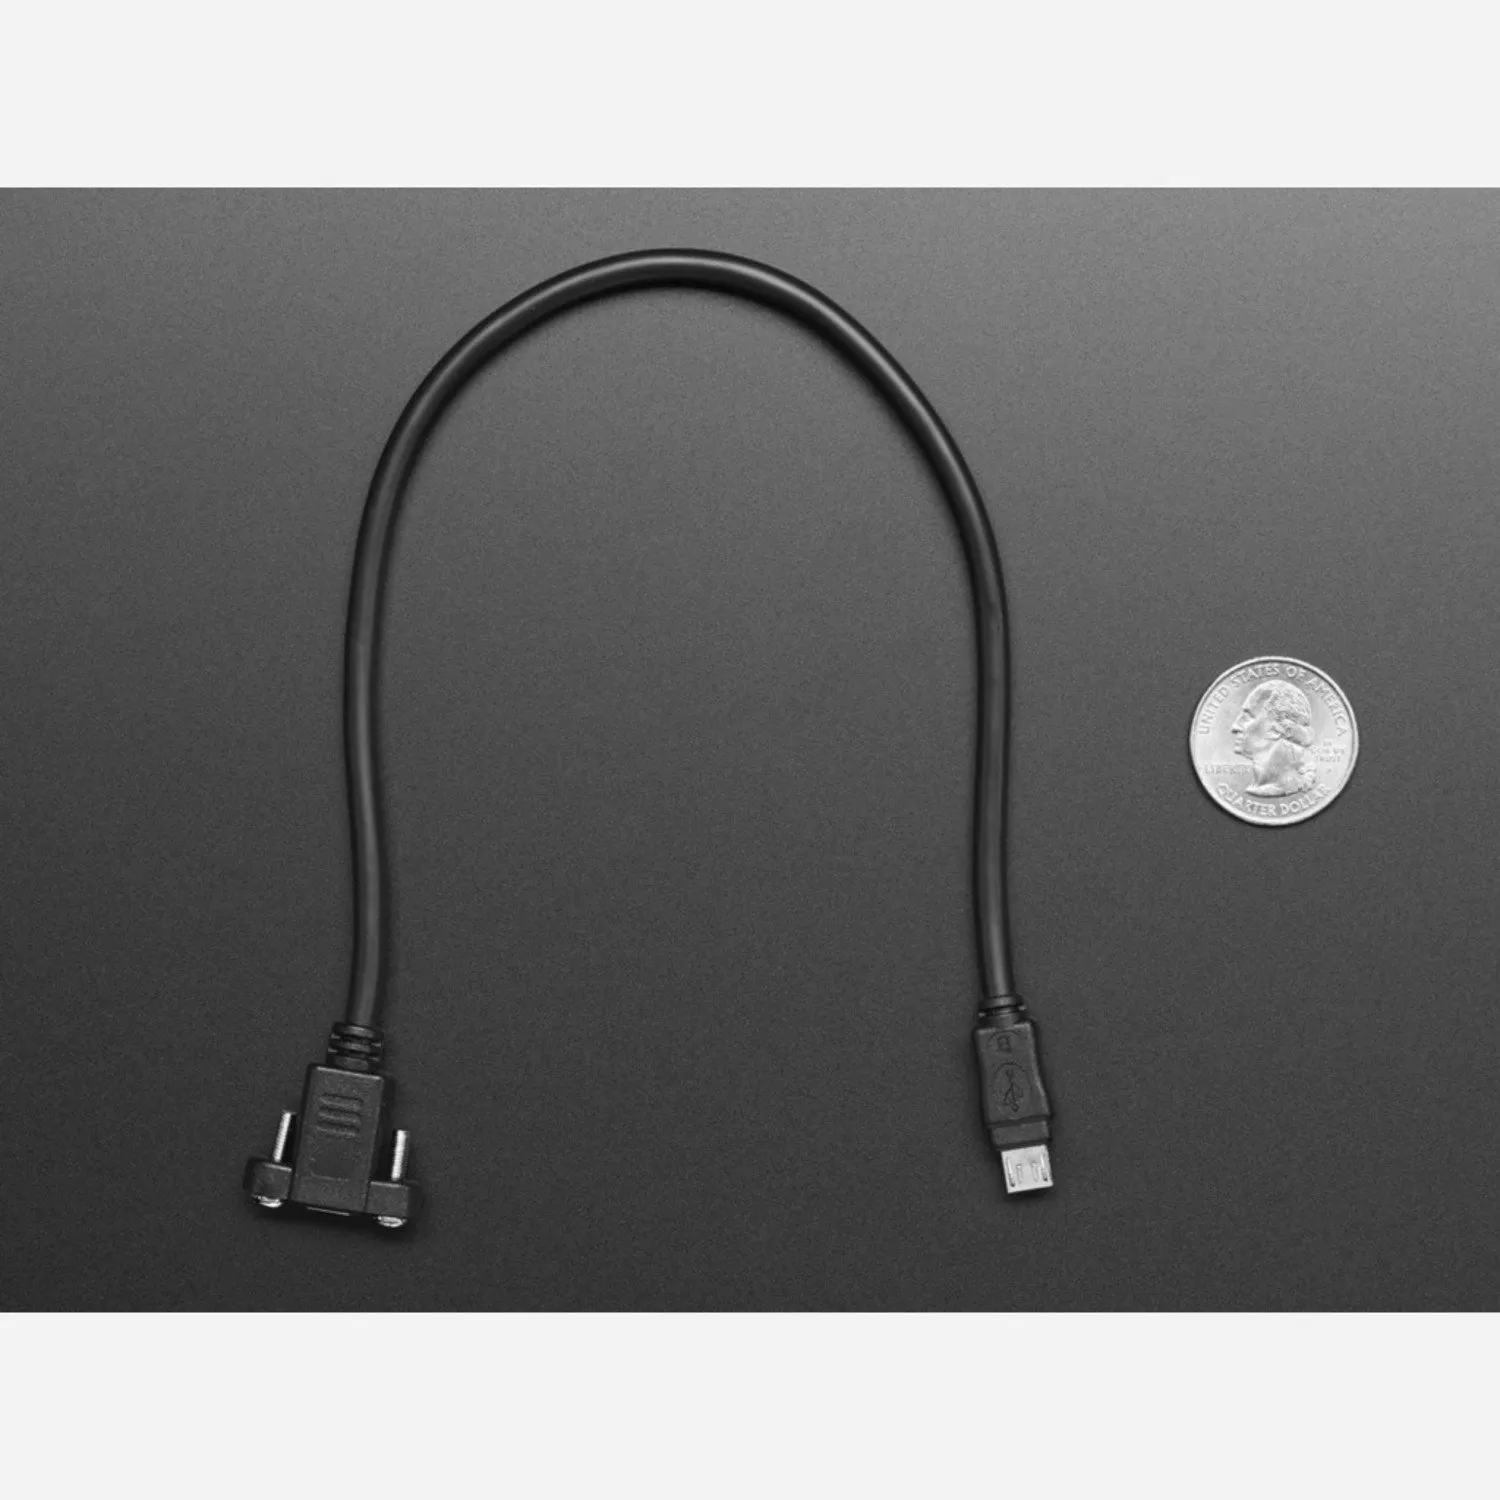 Photo of Panel Mount Extension USB Cable - Micro B Male to Micro B Female